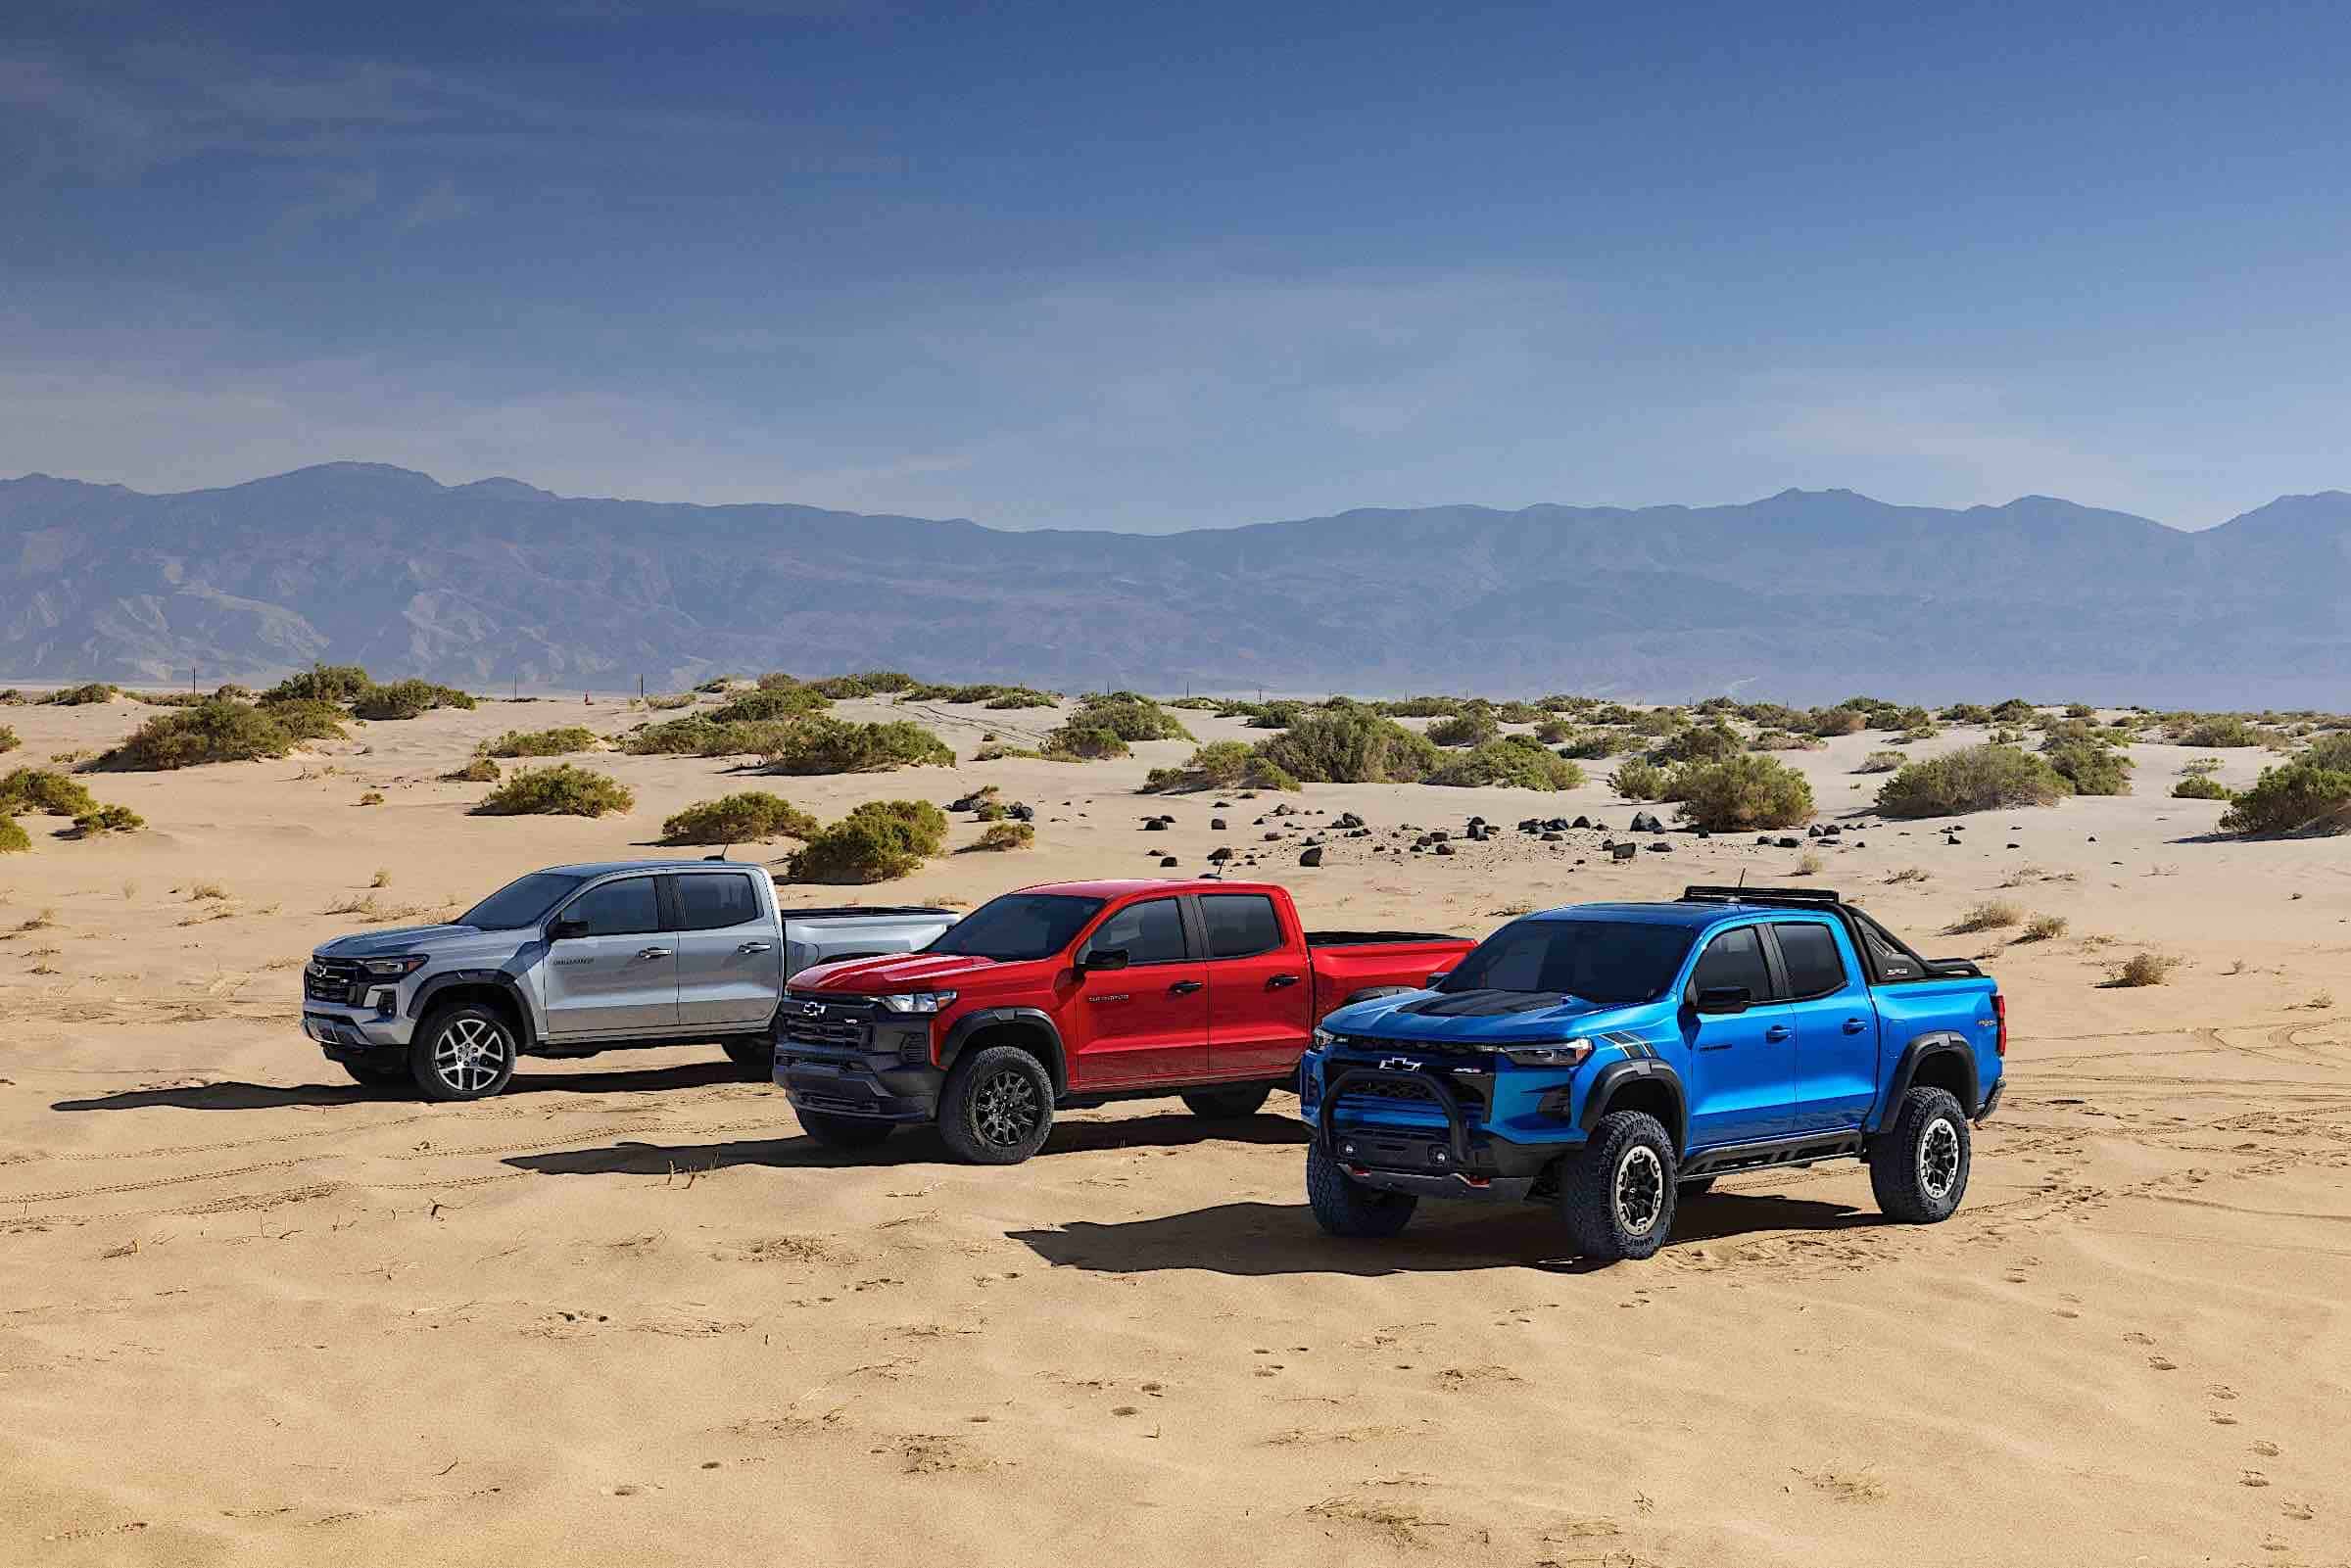 Three 2023 Chevrolet Colorado parked in the desert.